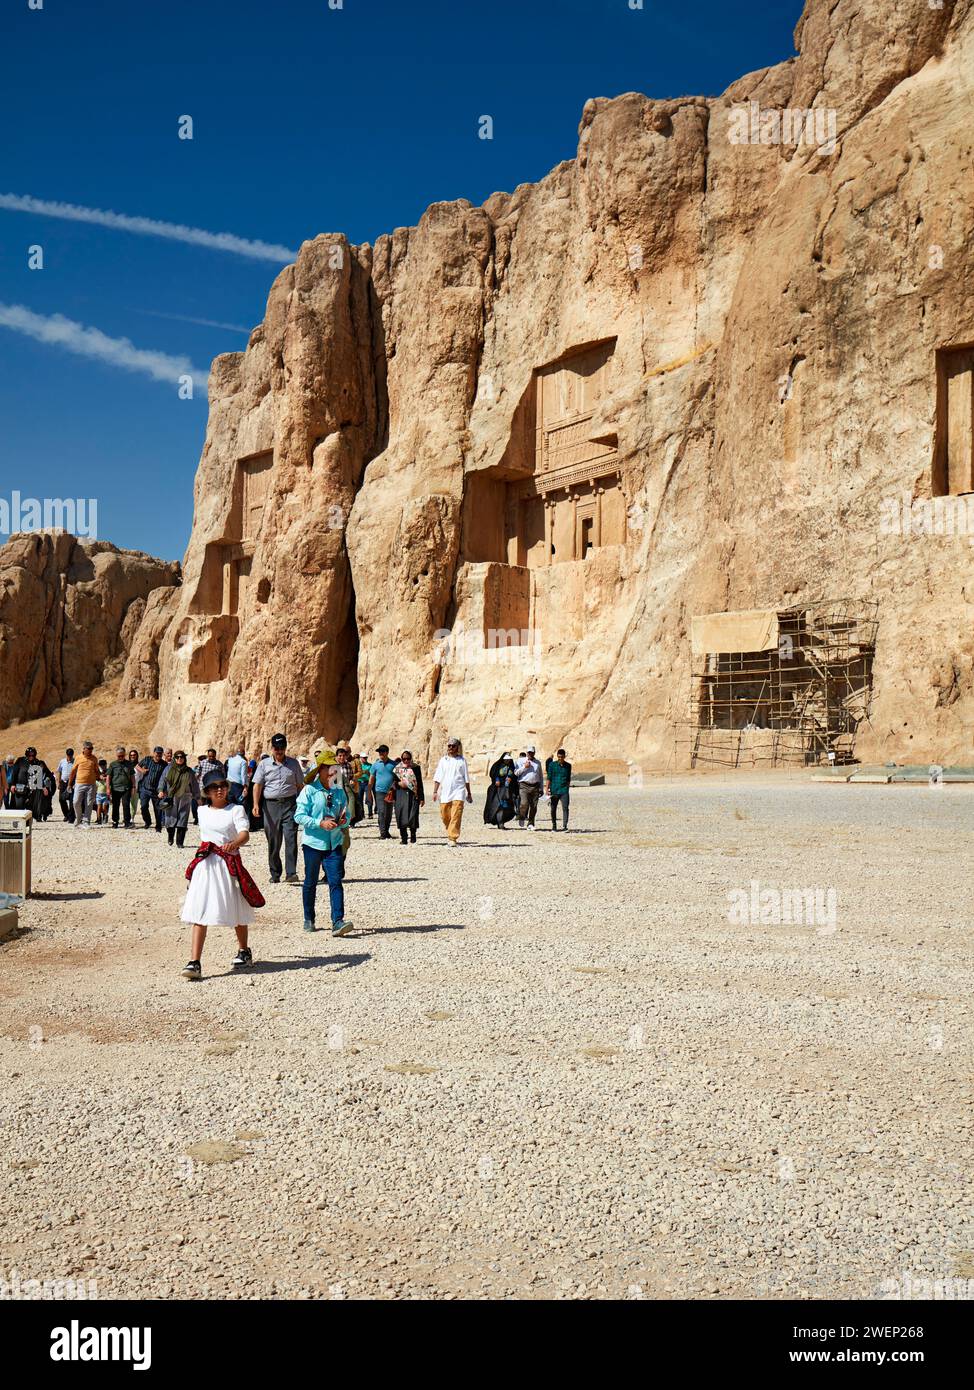 A group of tourists walk in Naqsh-e Rostam Necropolis, low rocky hill with rock-cut tombs of kings of Achaemenian dynasty near Persepolis, Iran. Stock Photo